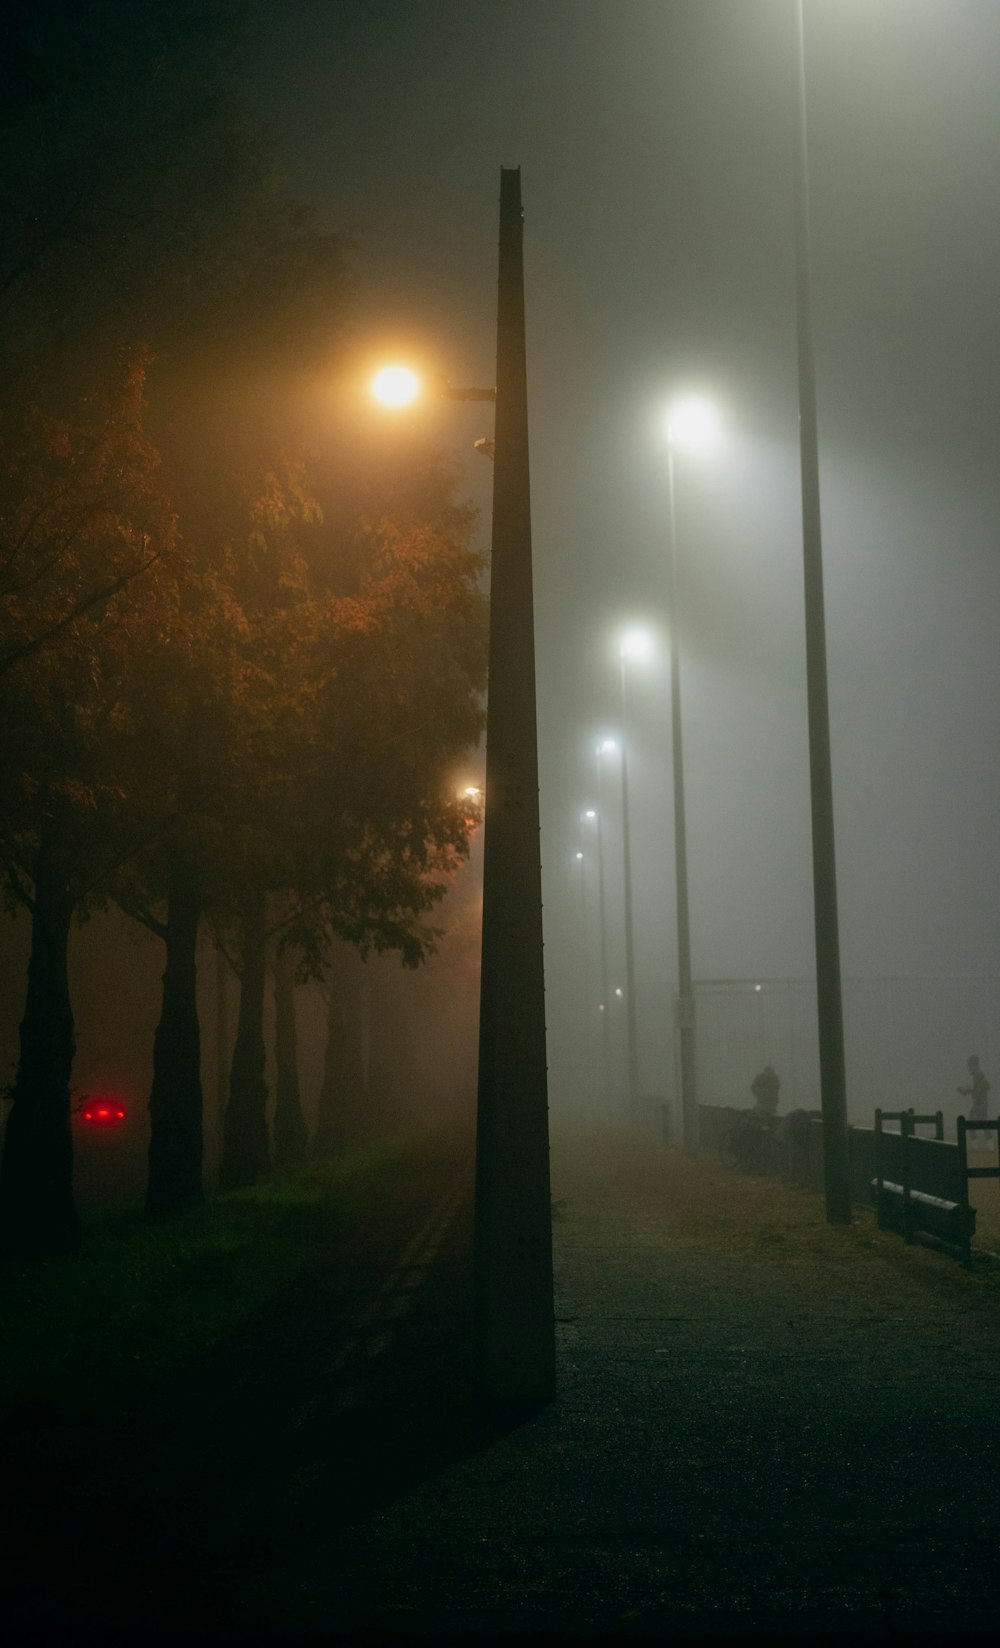 a foggy night in a park with street lights